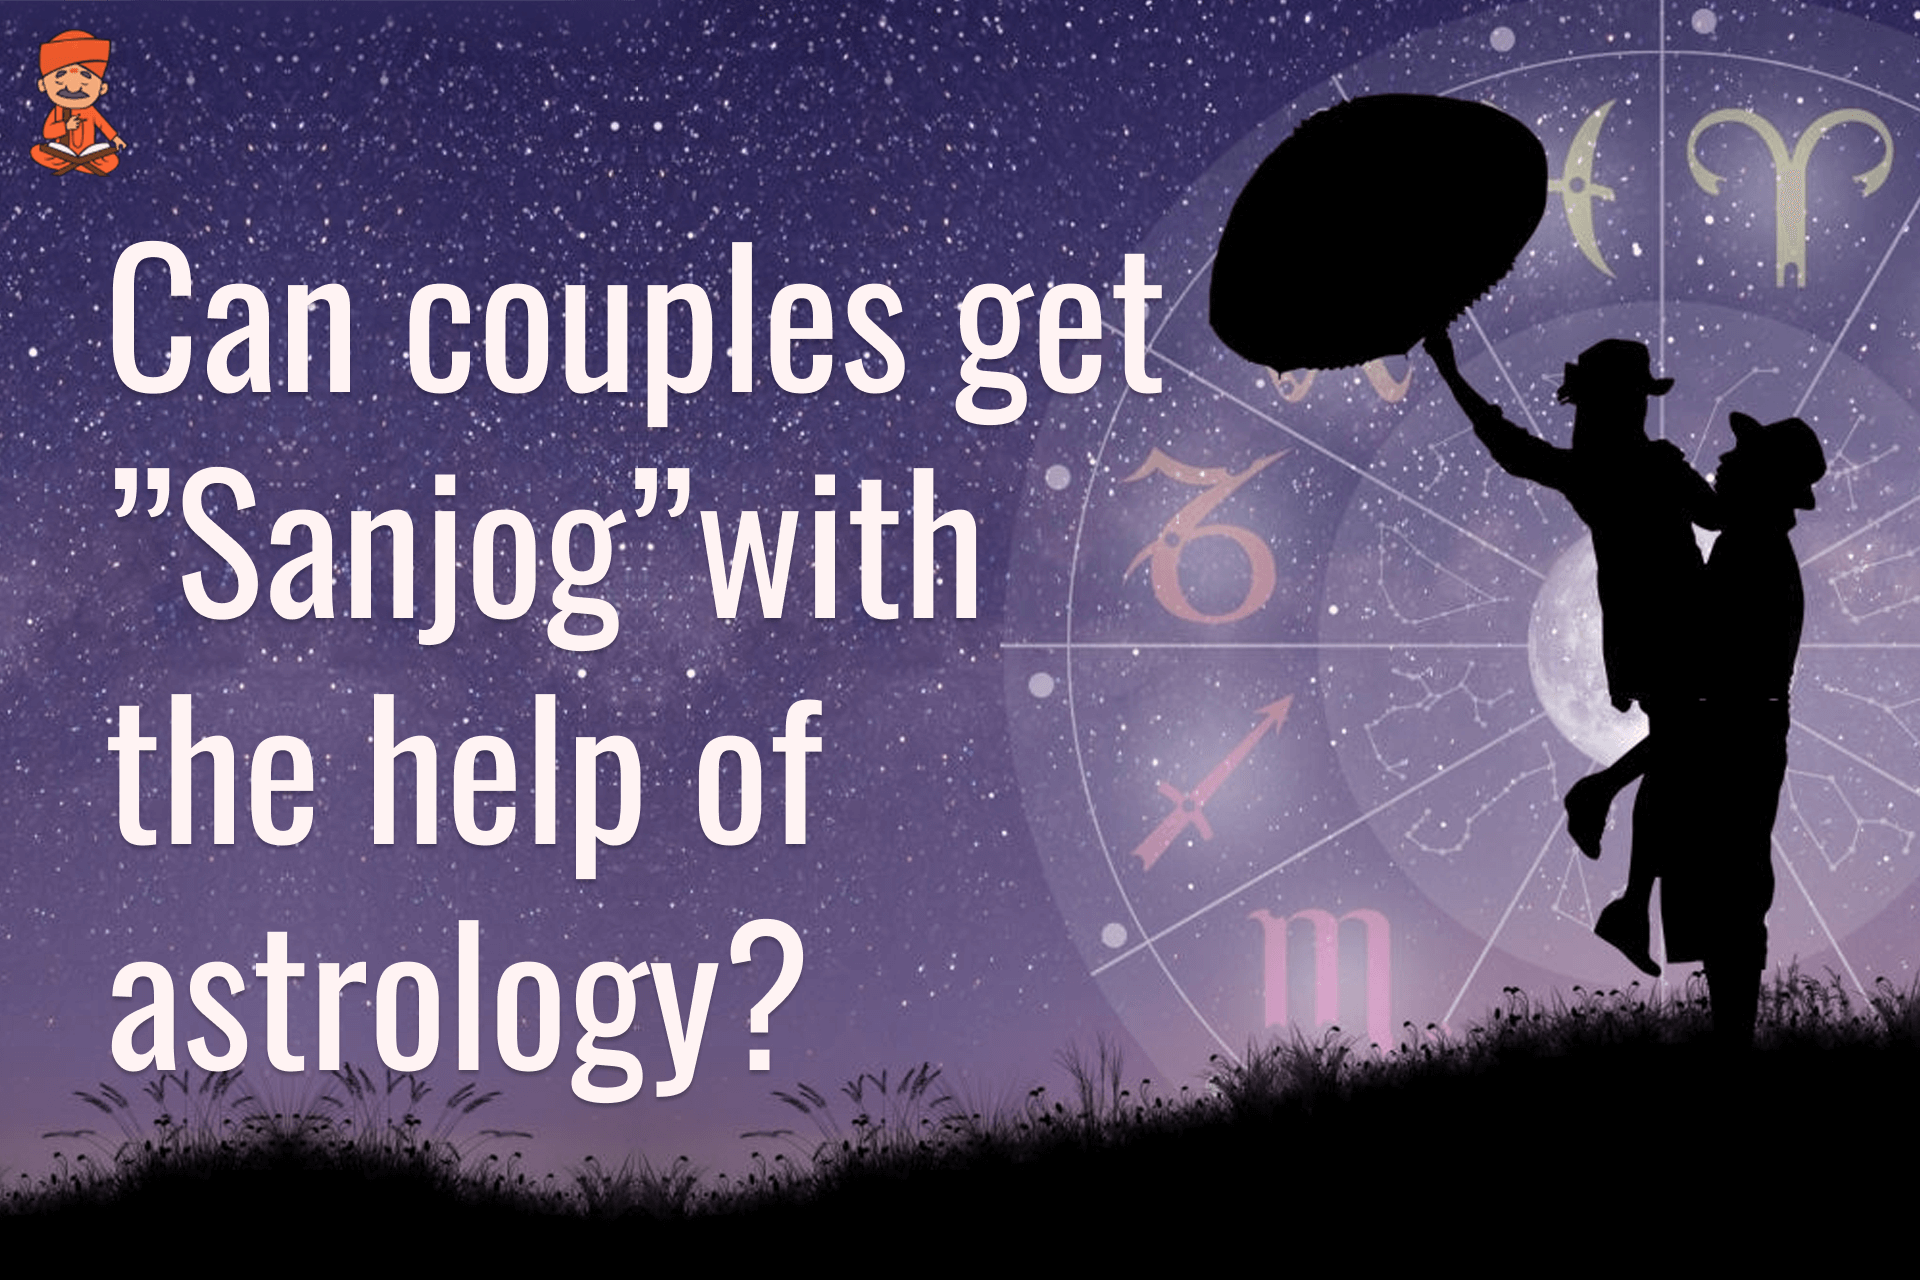 Can Couples Get “Sanjog” With The Help Of Astrology?